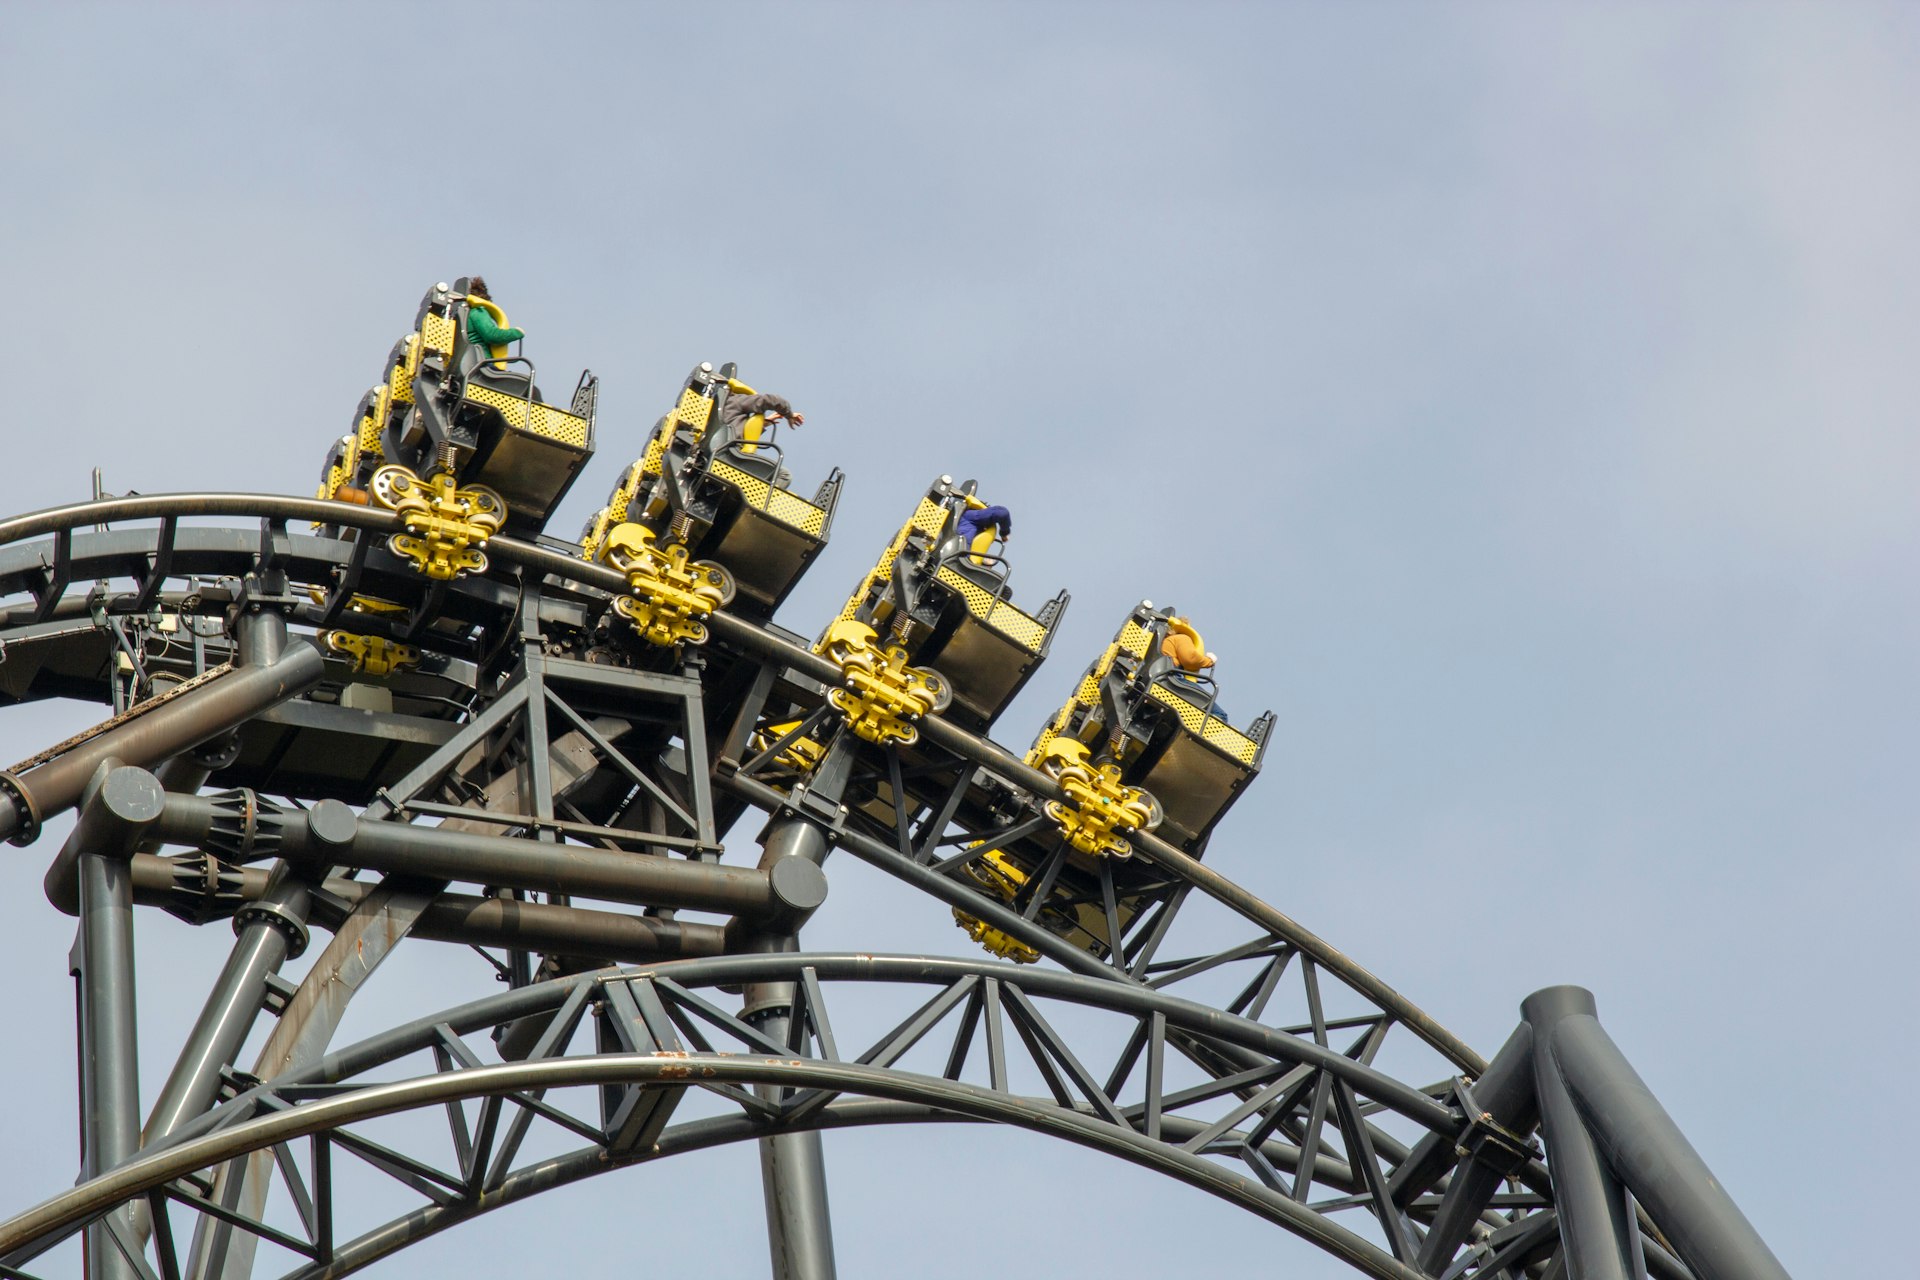 A black-and-yellow rollercoaster with four separate carriages makes its way along a high track